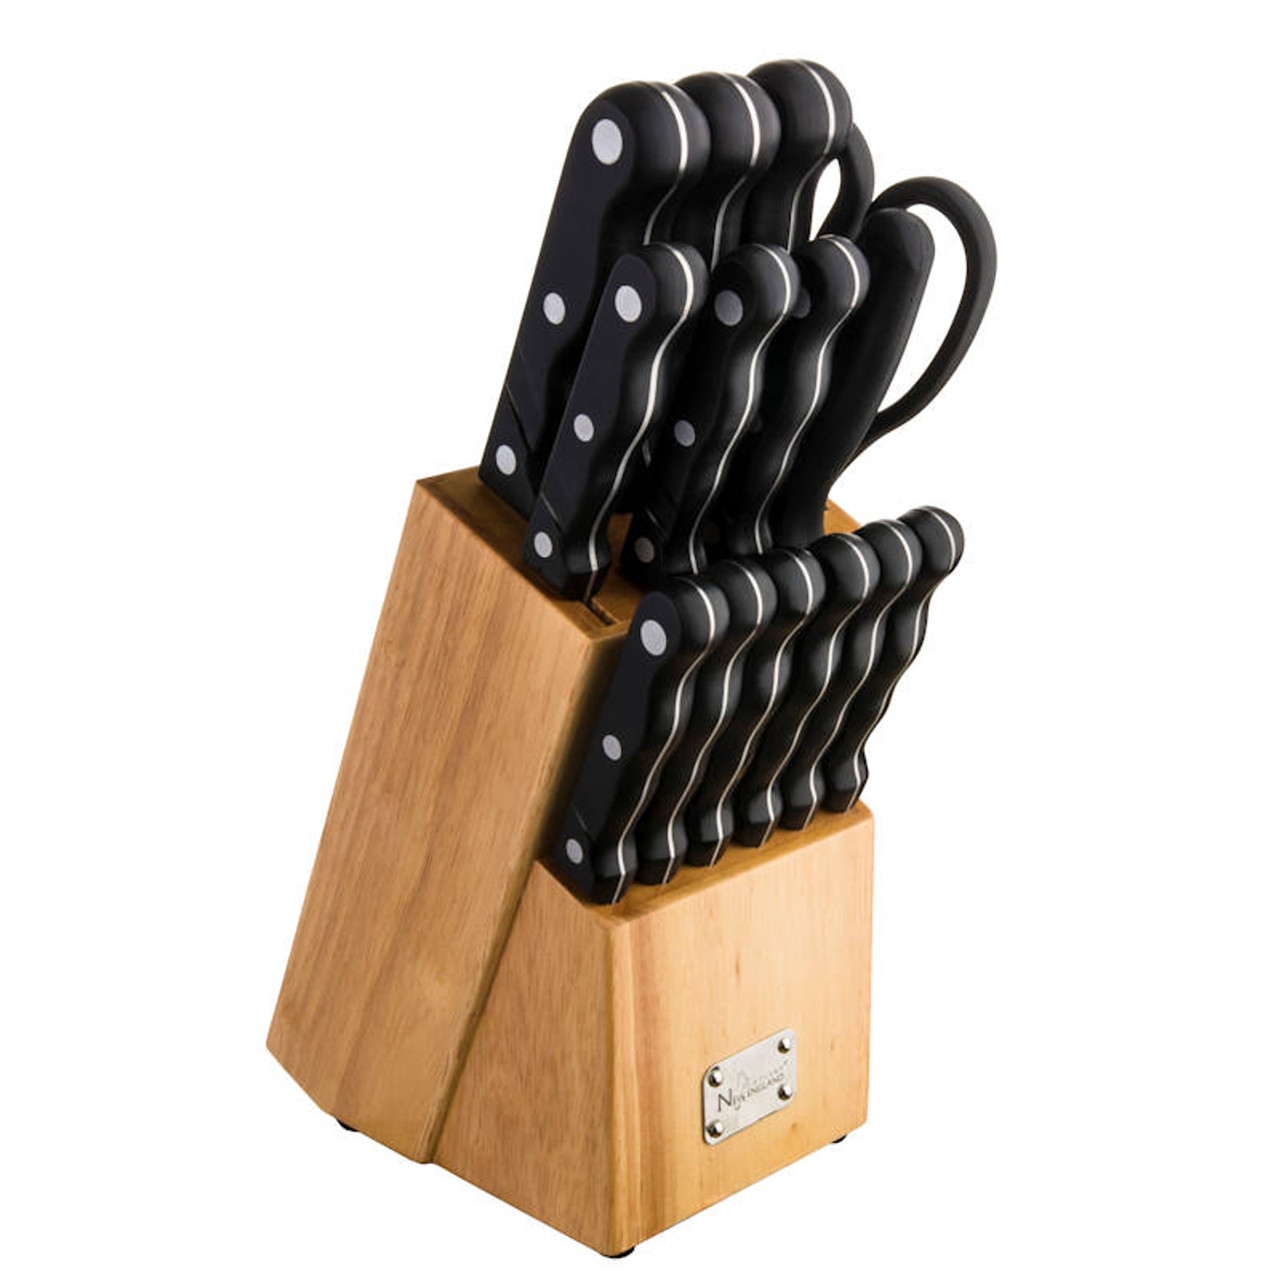 Premium 15 piece Knife Block Sets with Shears - High Carbon